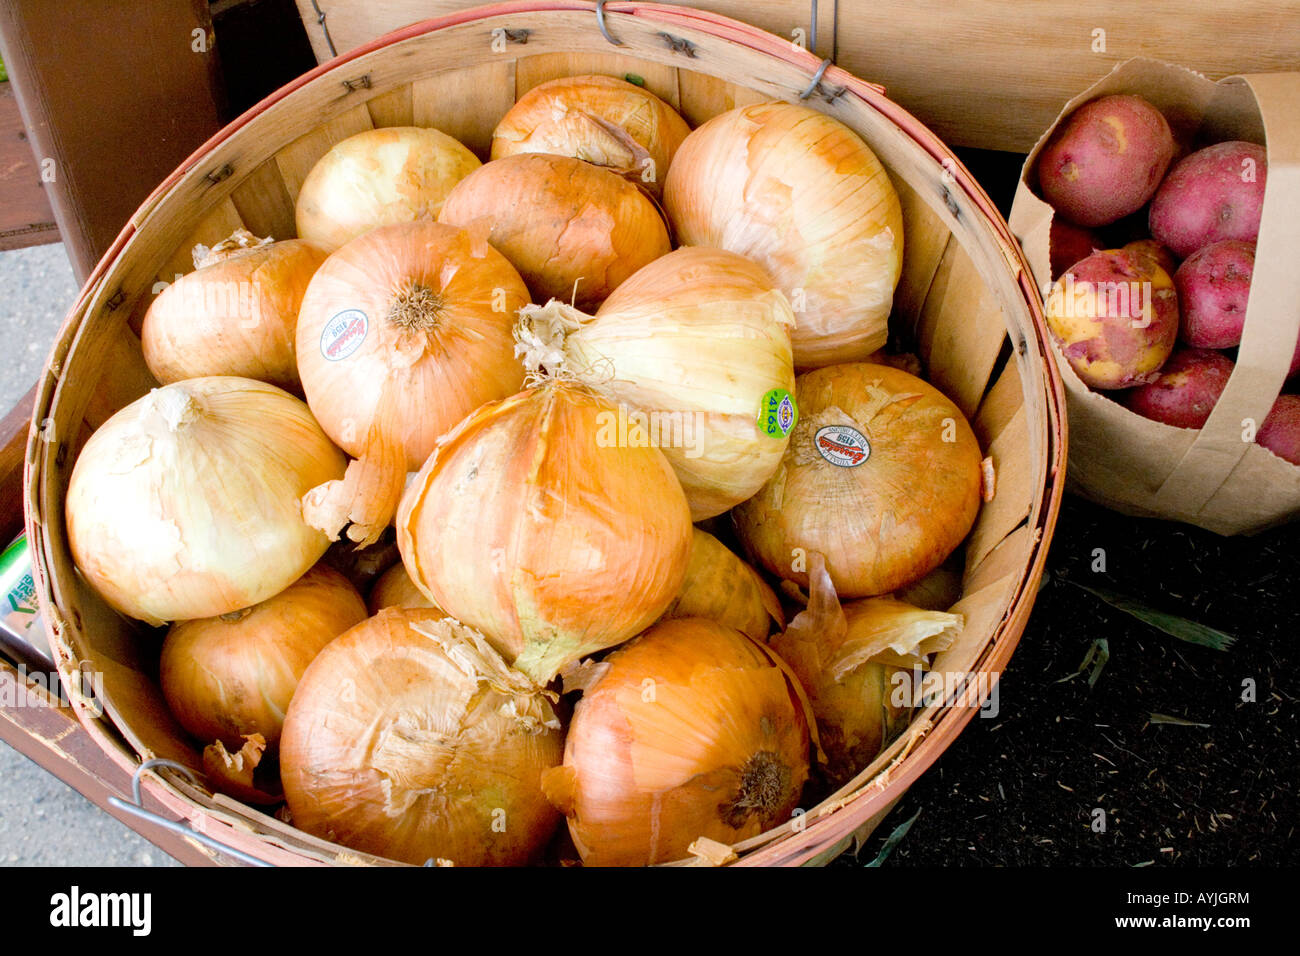 Wicker basket of yellow onions and bag of red potatoes at outdoor vegetable strand. Sauk Centre Minnesota USA Stock Photo